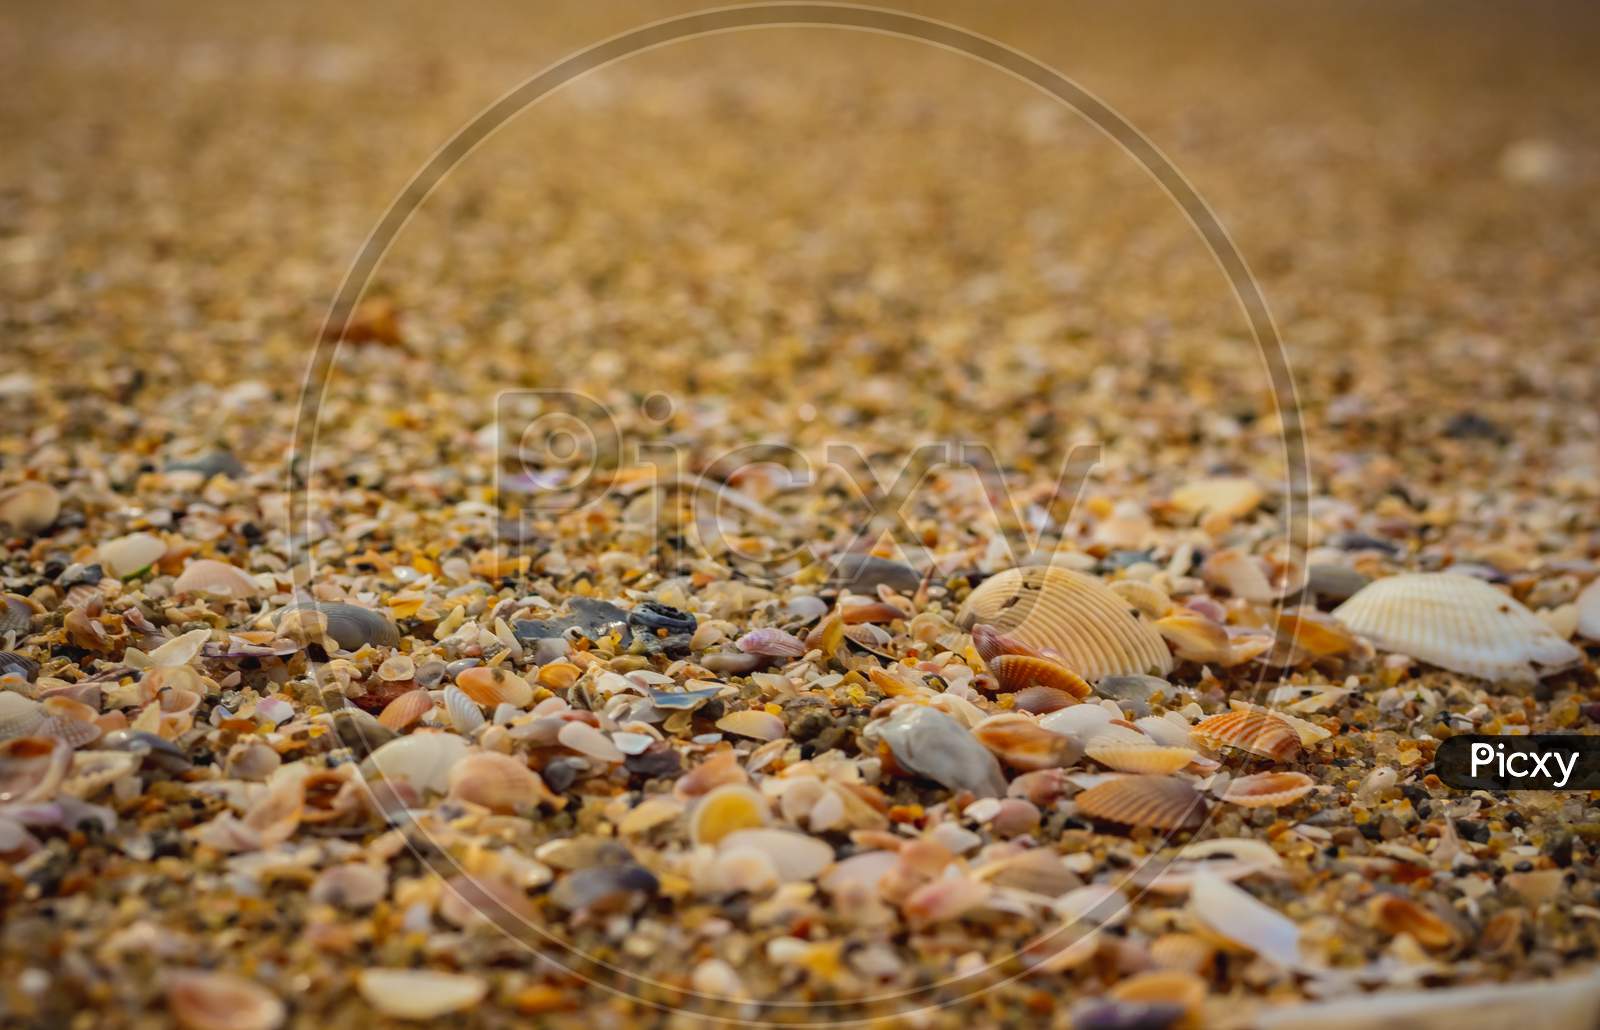 Small Shells On The Beach Sand . View Of Beach Covered With Different Sea Shells. Selective Focus. Many Small Shells Close-Up Lying On The Beach On A Summer Day